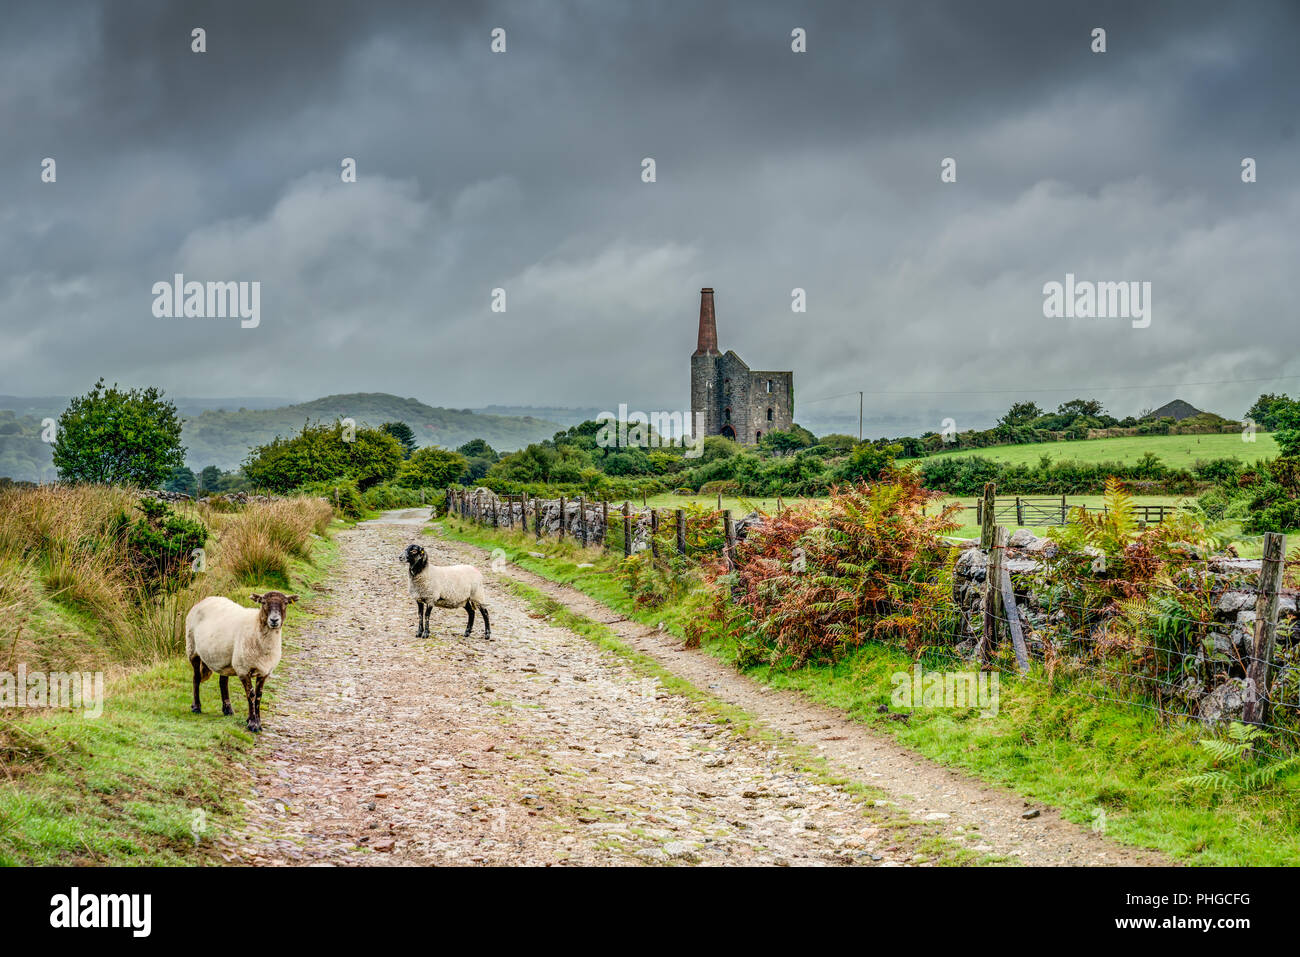 Looking down an unmade rural track with two sheep in the foreground and a Cornish engine house in the misty, grey cloudy weather, some autumn colour. Stock Photo